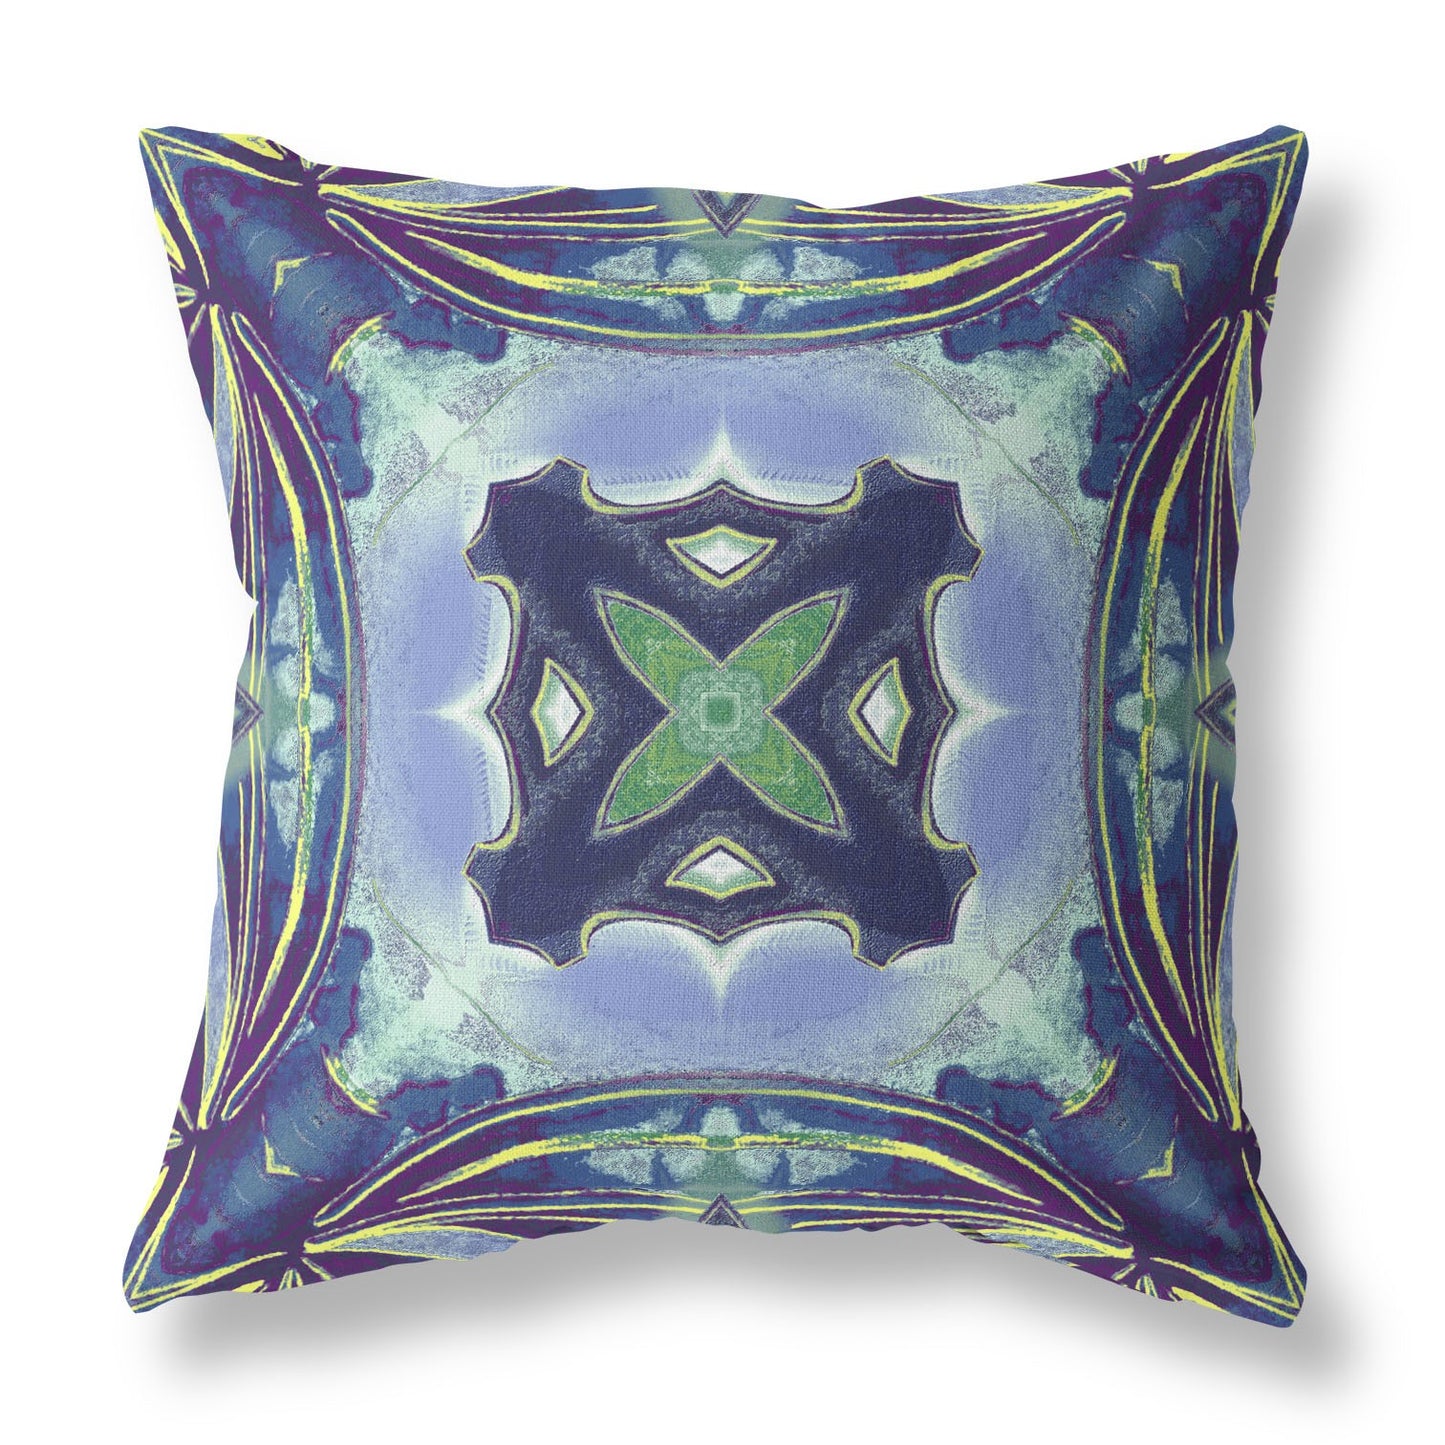 18" X 18" Peacock And Blue Zippered Geometric Indoor Outdoor Throw Pillow